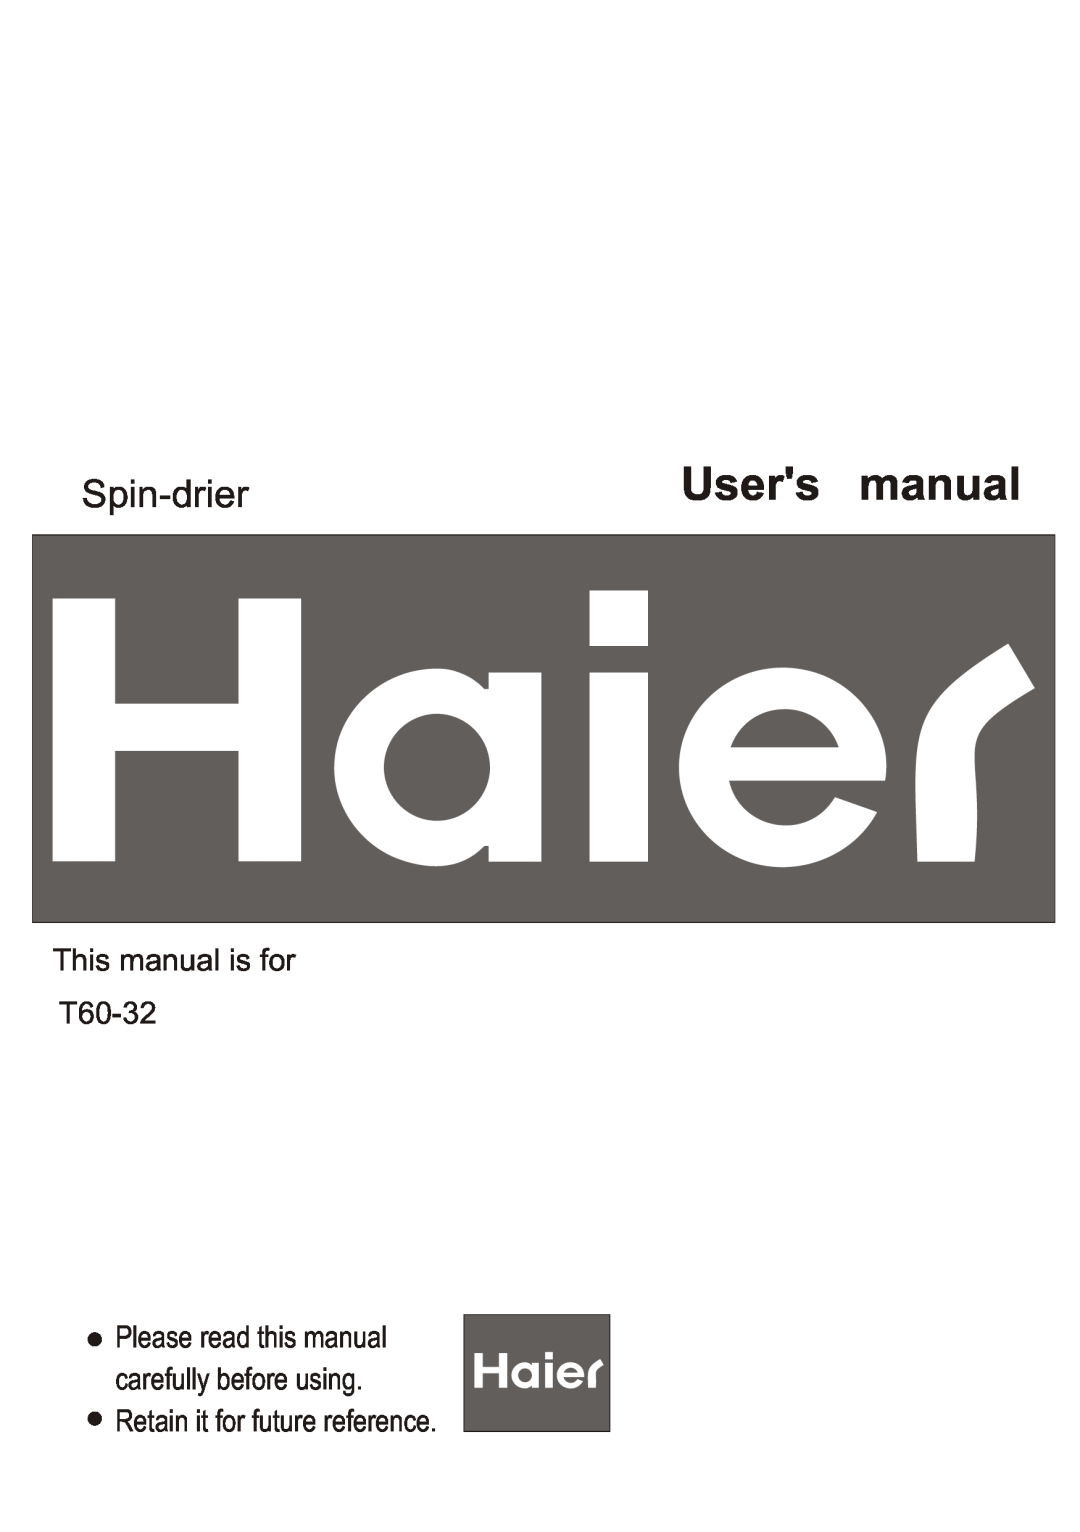 Haier user manual Users manual, This manual is for T60-32, Spin-drier 